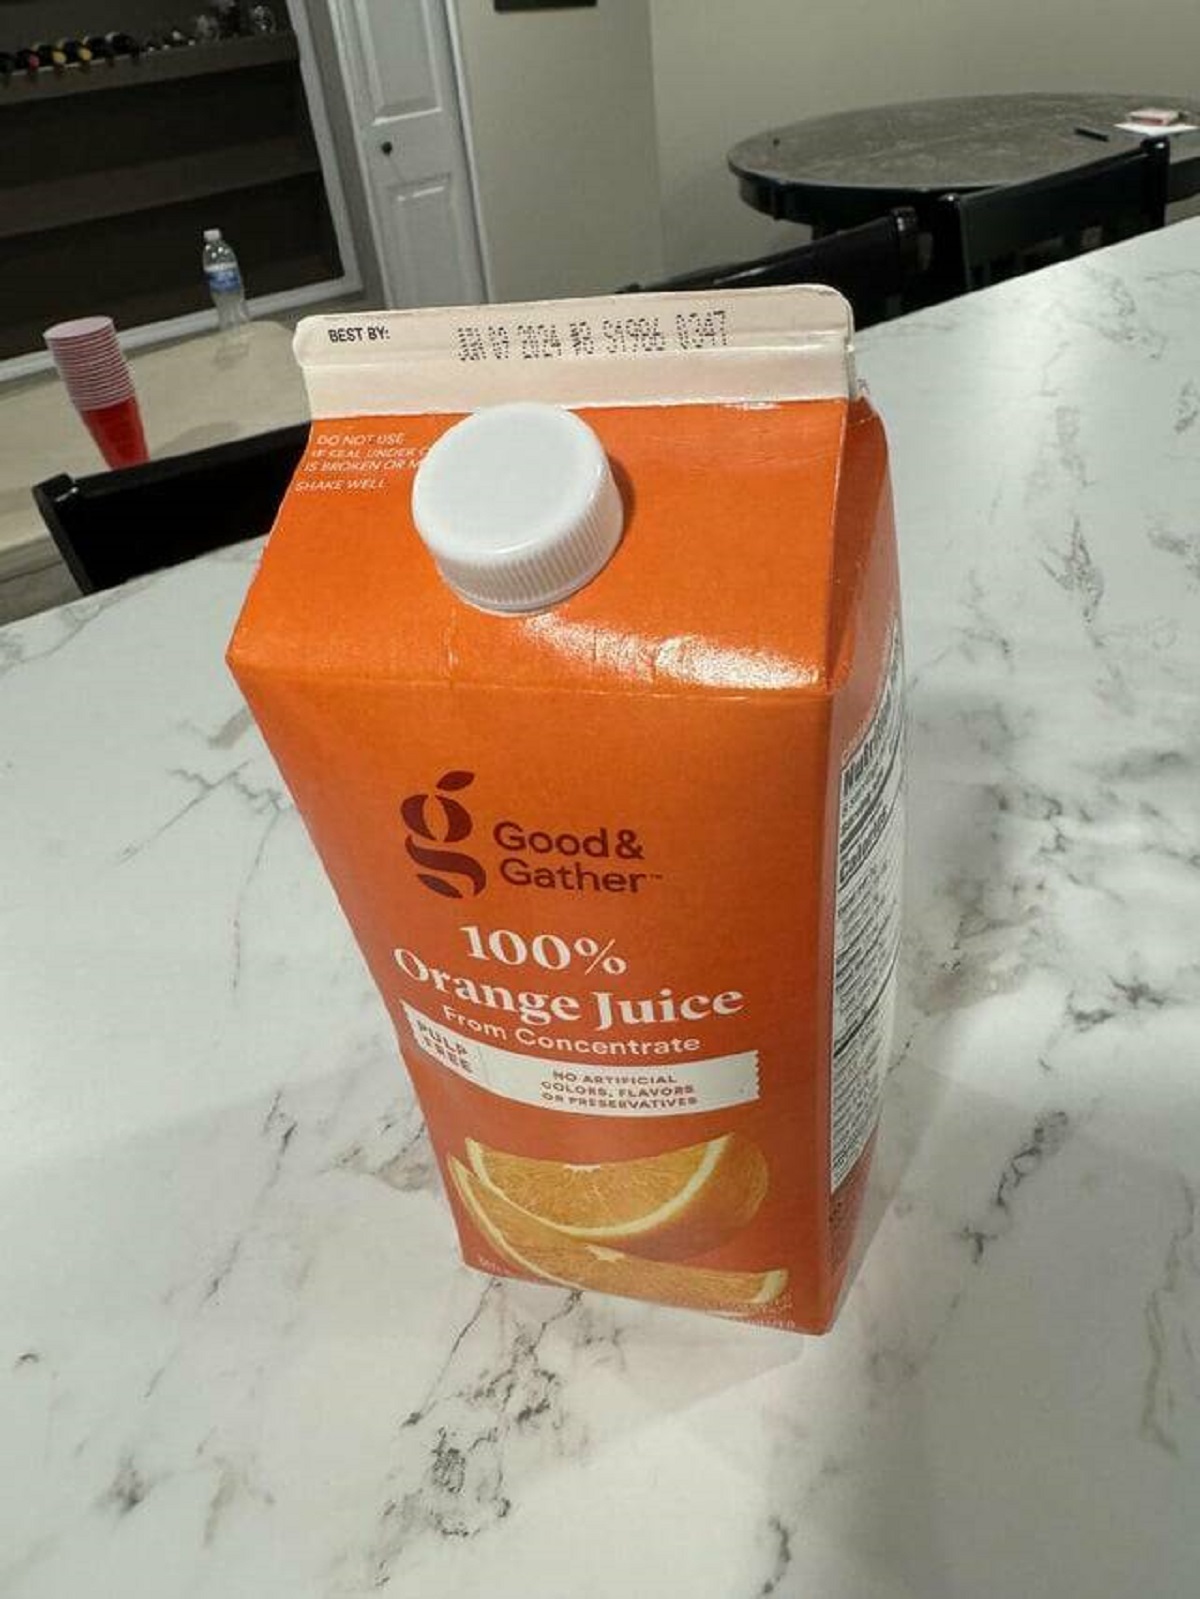 "This orange juice rapidly inflates itself immediately after closing"